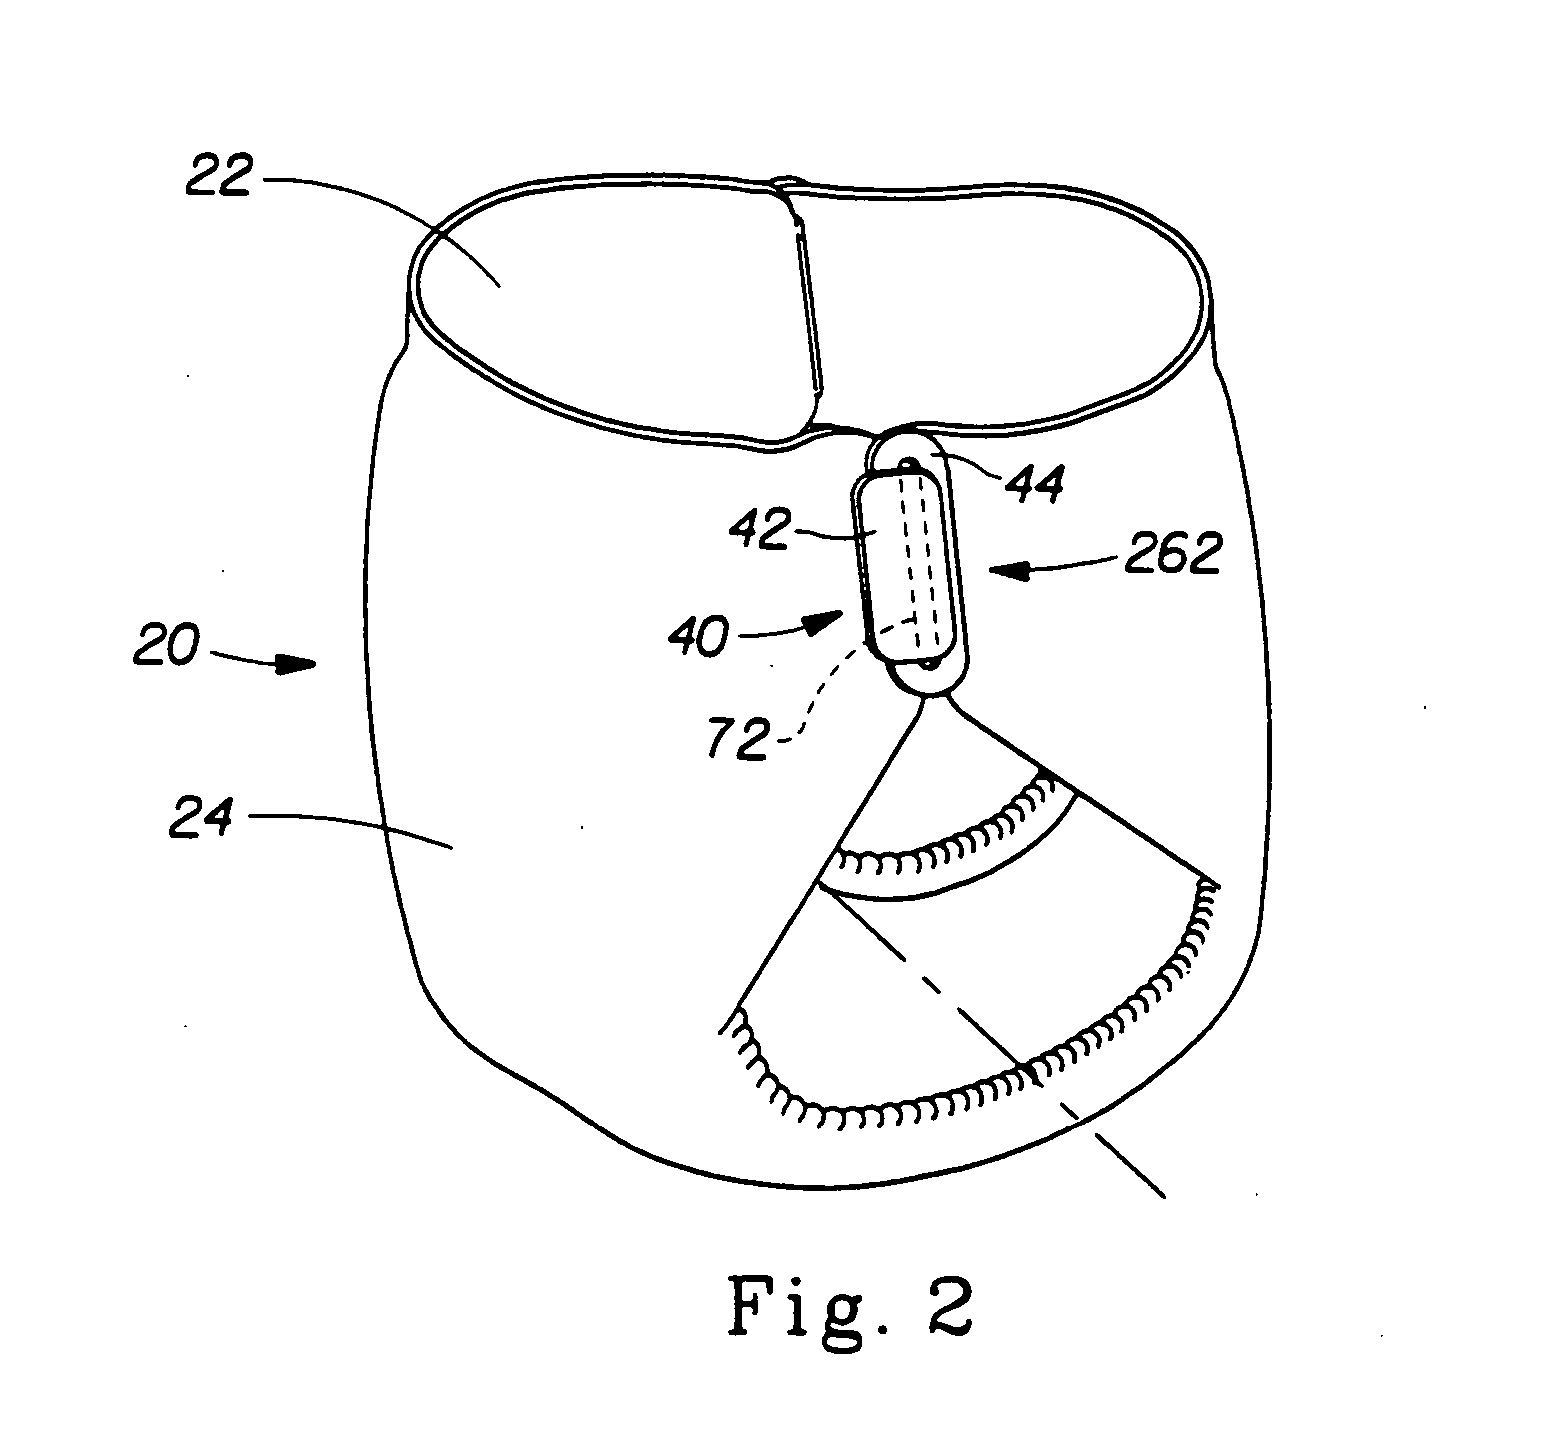 Method of dynamically pre-fastening a disposable absorbent article having a slot-and-tab-fastening system